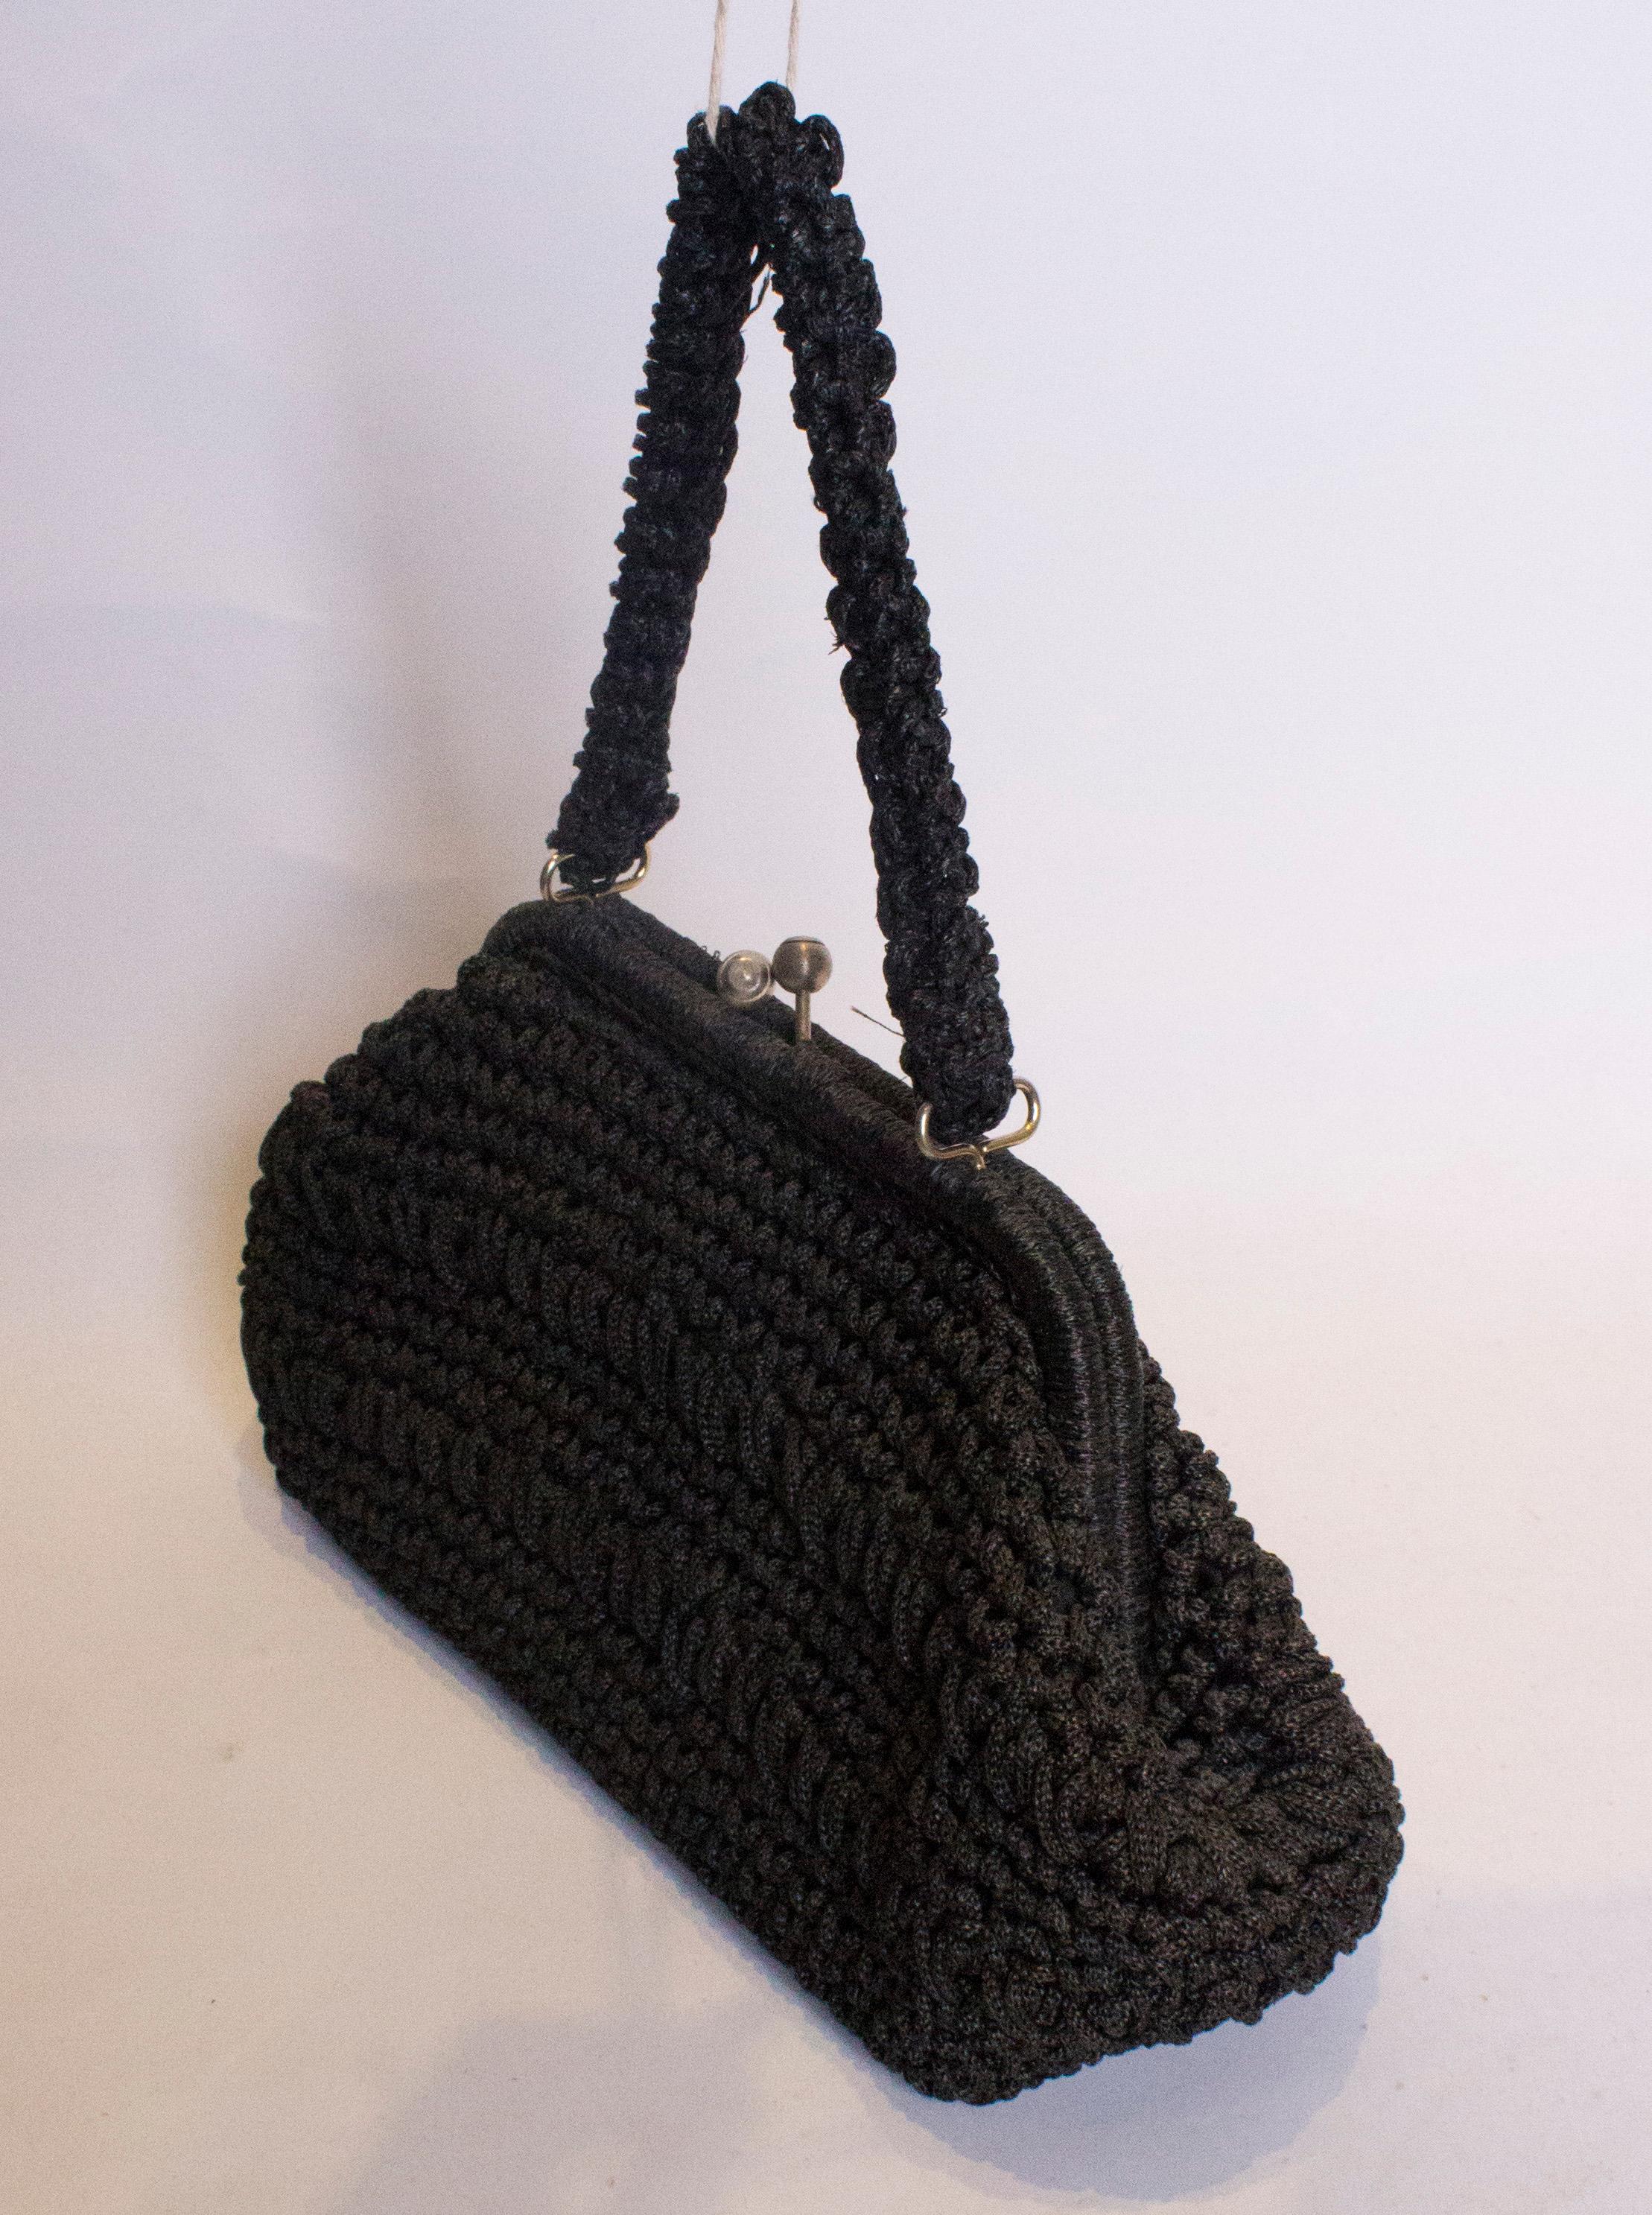 A chic vintage , black raffia bag. The bag has a central clasp and one internal pocket.
Measurements: width 14'', height 8'', depth 5''  